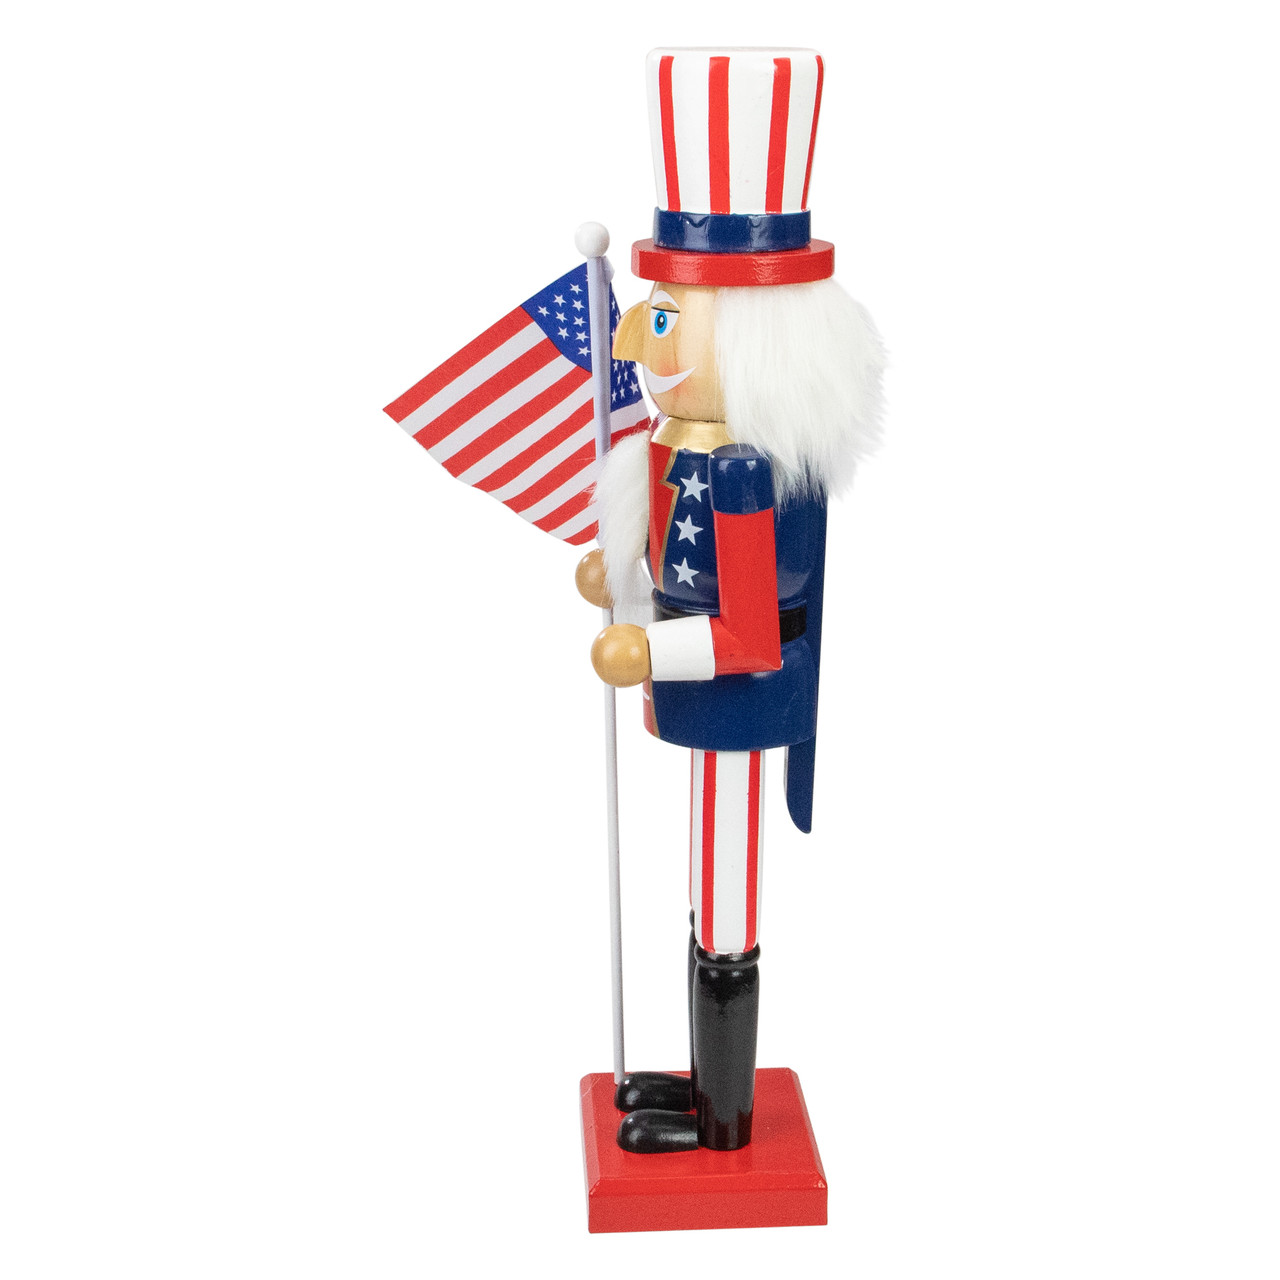 15 Tall 100% Wood Clever Creations Uncle Sam Nutcracker Comes with American Flag Perfect for Shelves and Tables Traditional Patriotic Christmas Decorative Nutcracker 